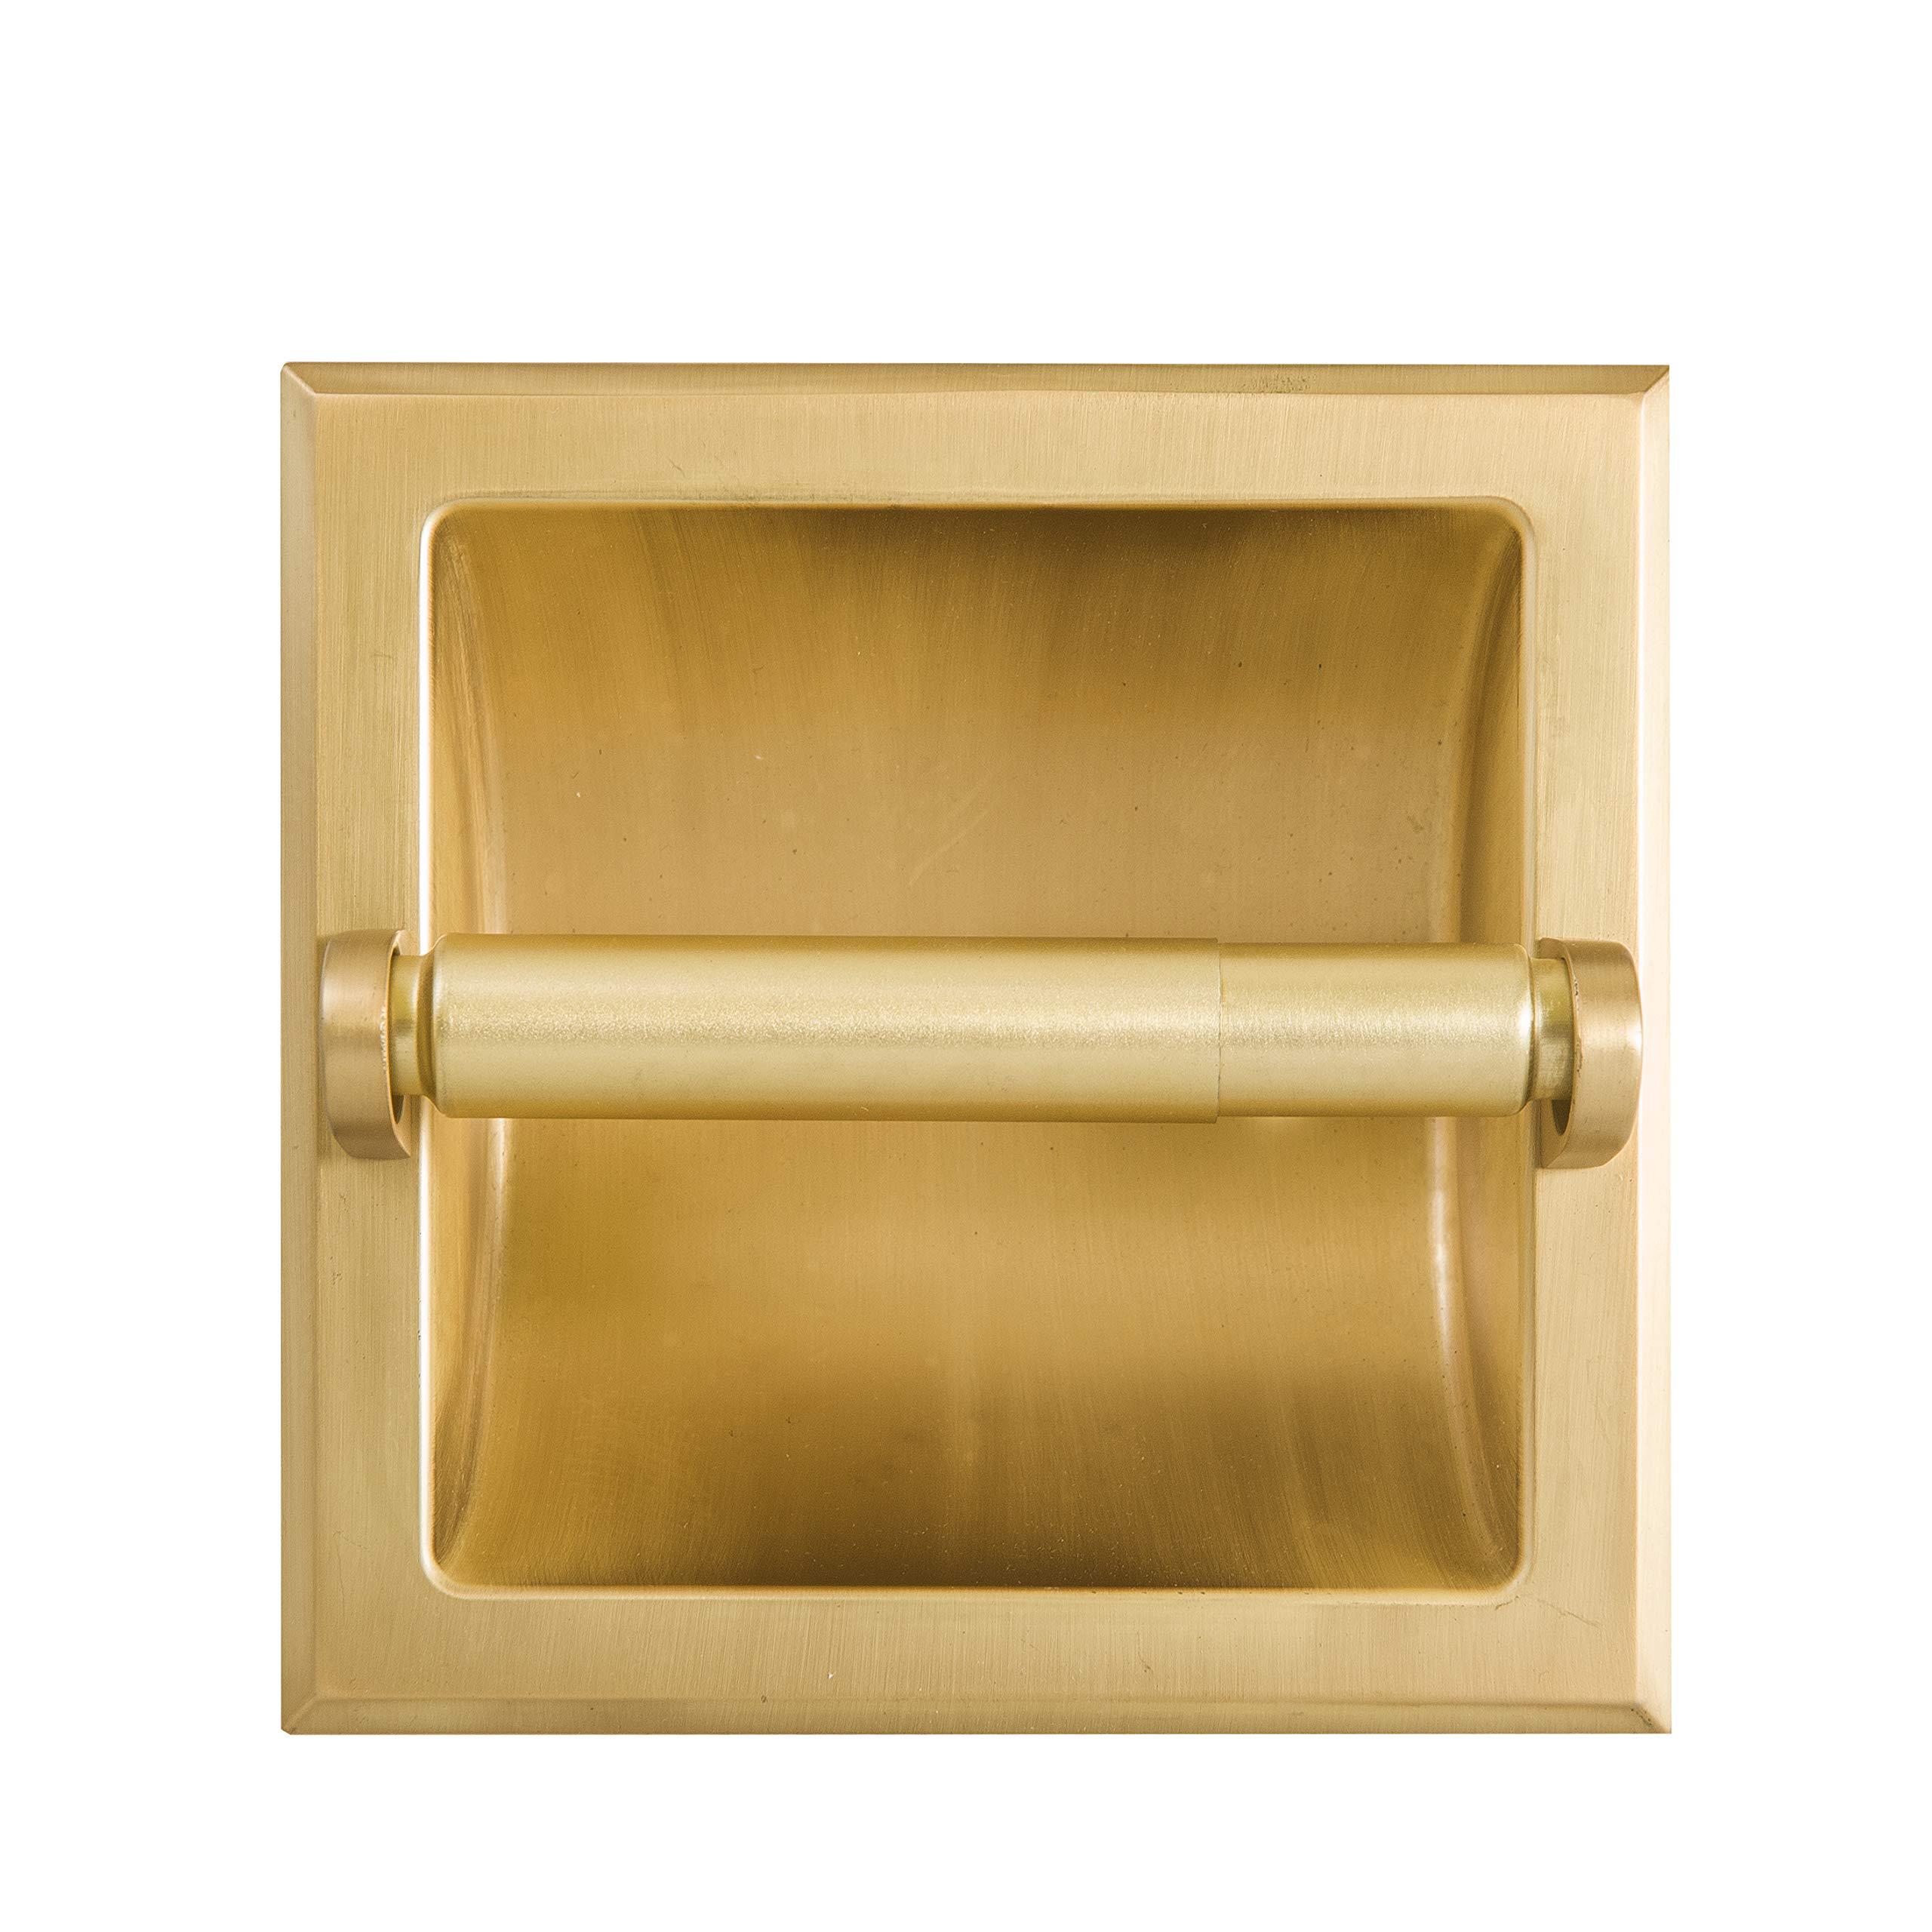 SENTO BETTER HOME BETTER LIFE sento recessed gold toilet paper